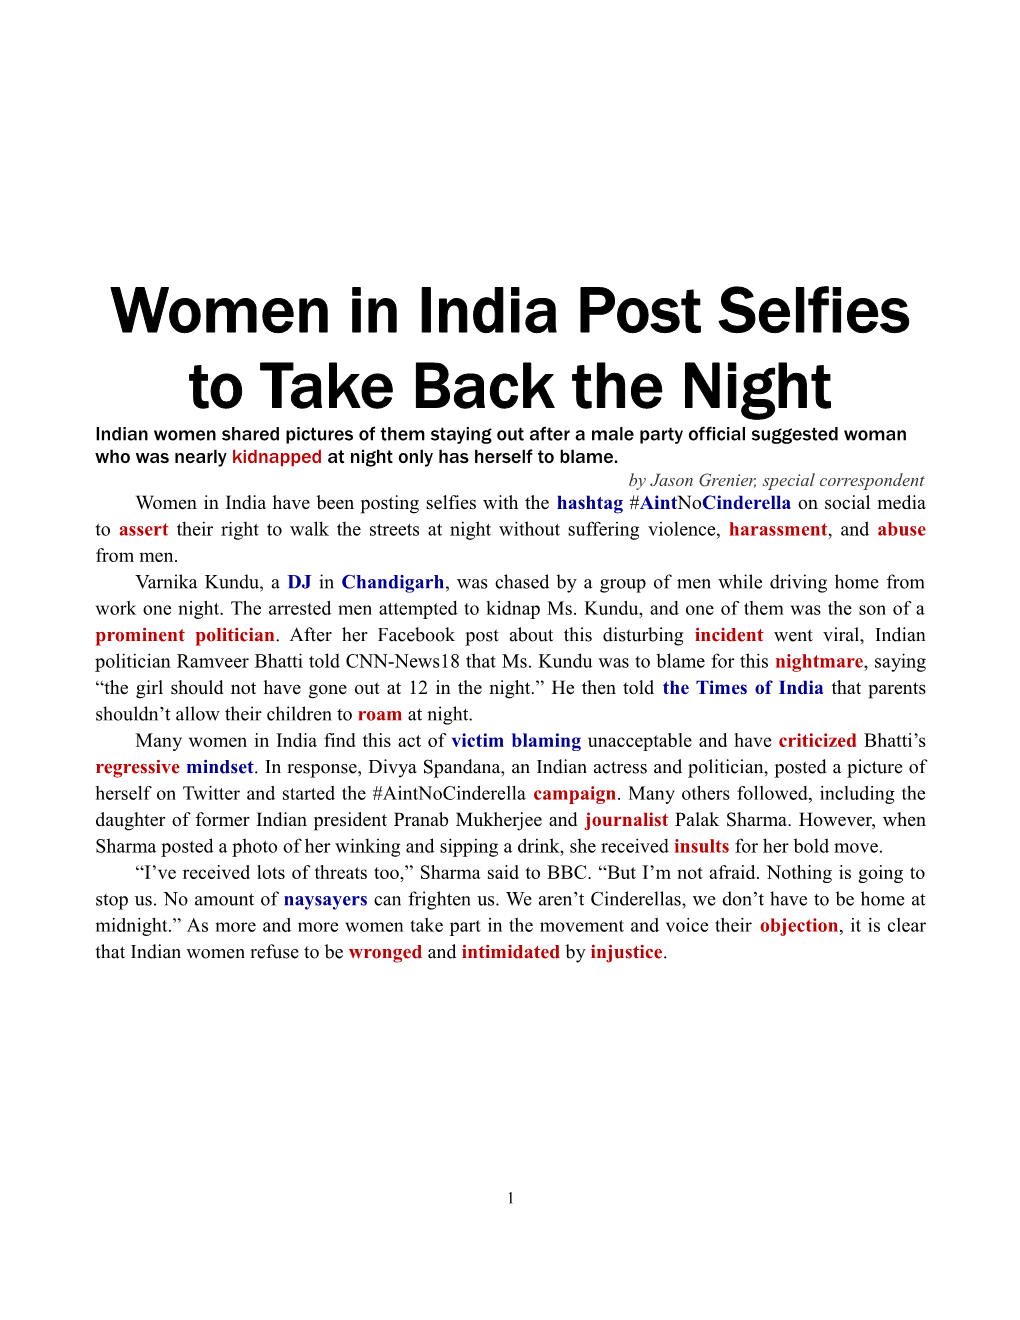 Women in India Post Selfies to Take Back the Night